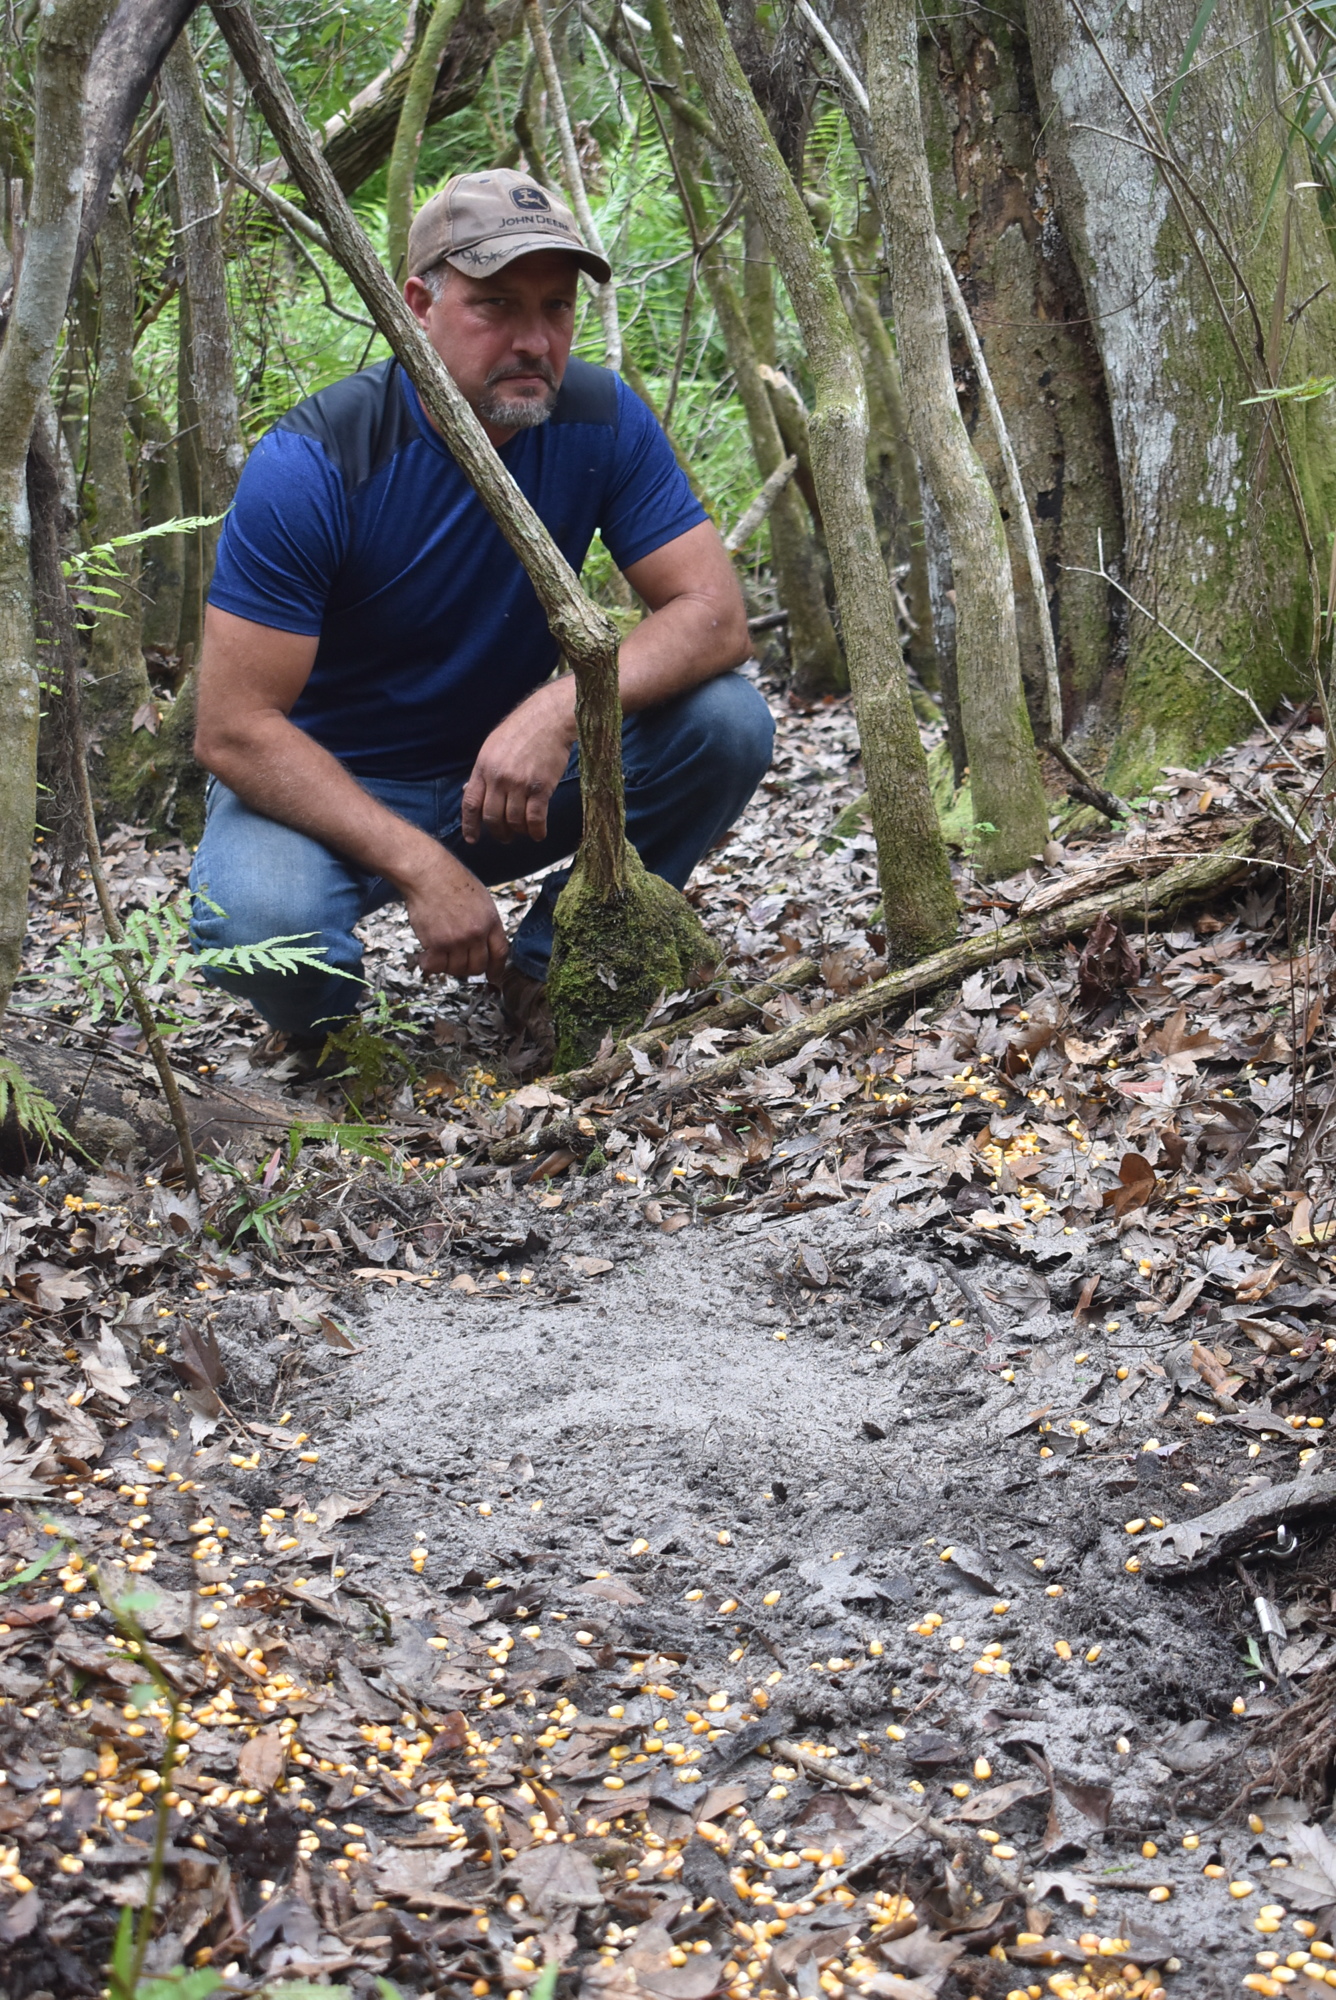 Pig trapper Juan Trevino inspects his work after completing a power snare trap, which is covered by dirt and surrounded by corn to attract pigs.